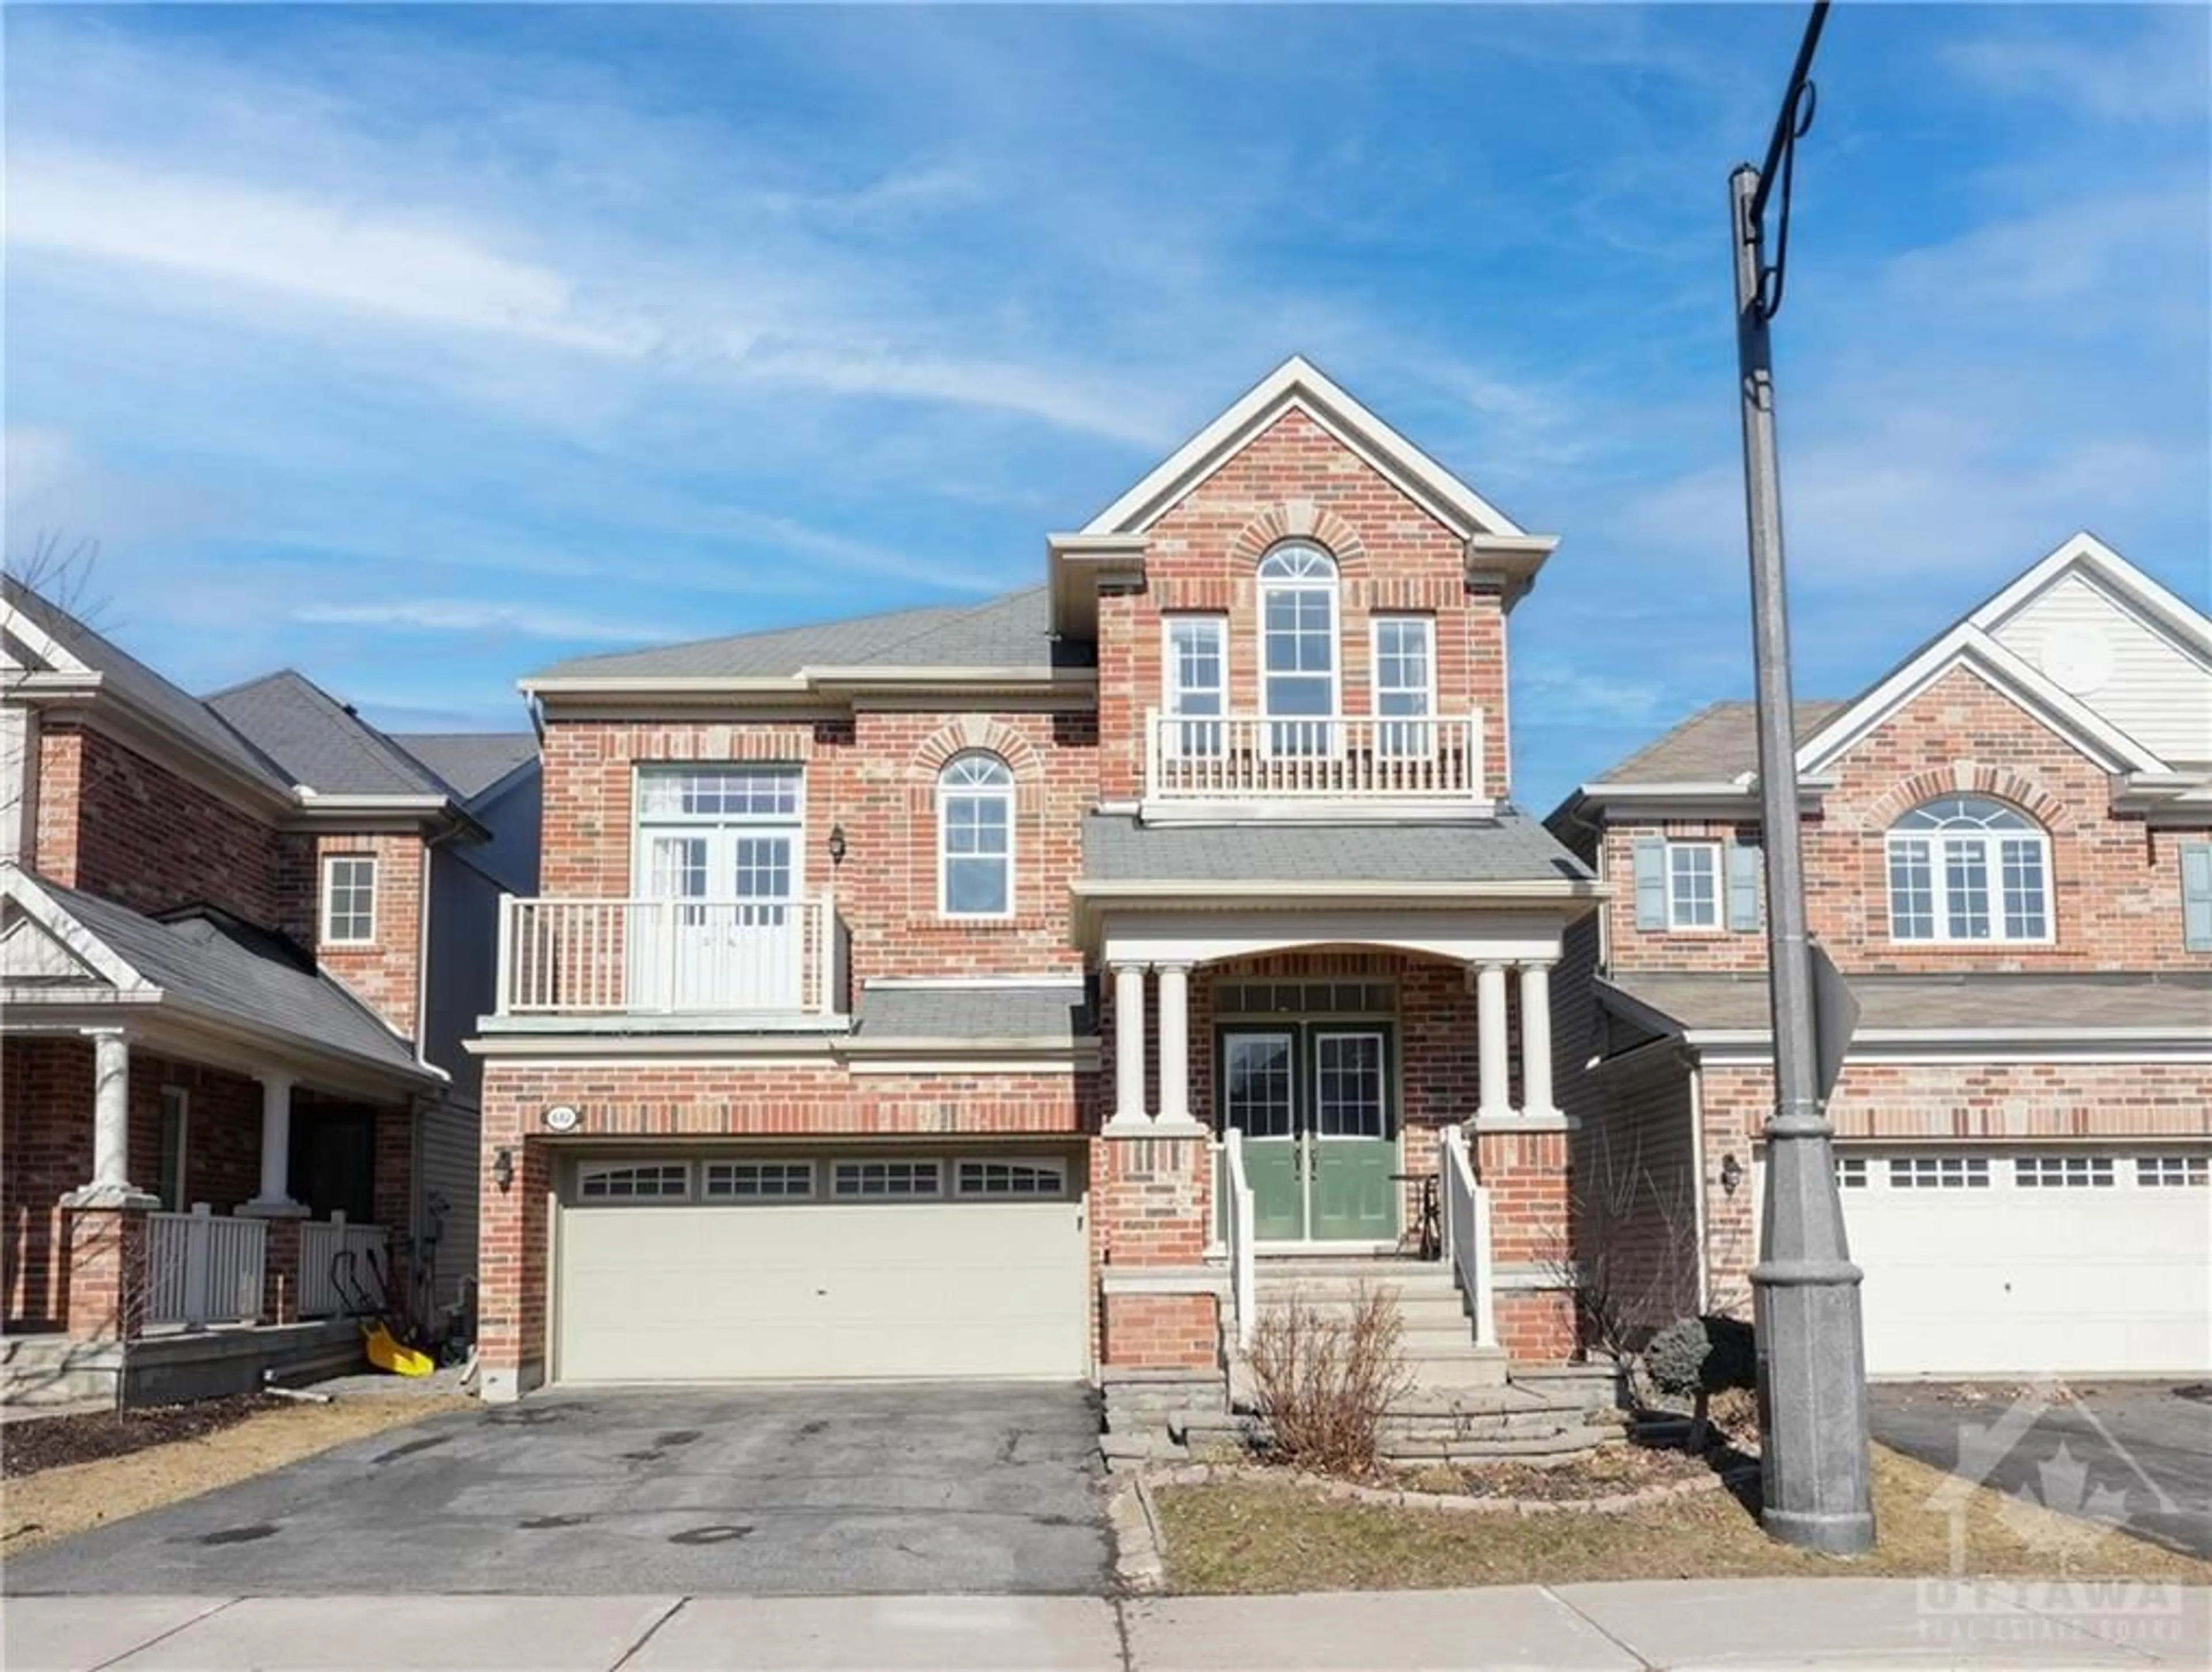 Home with brick exterior material for 642 ROSEHILL Ave, Stittsville Ontario K2S 0K2